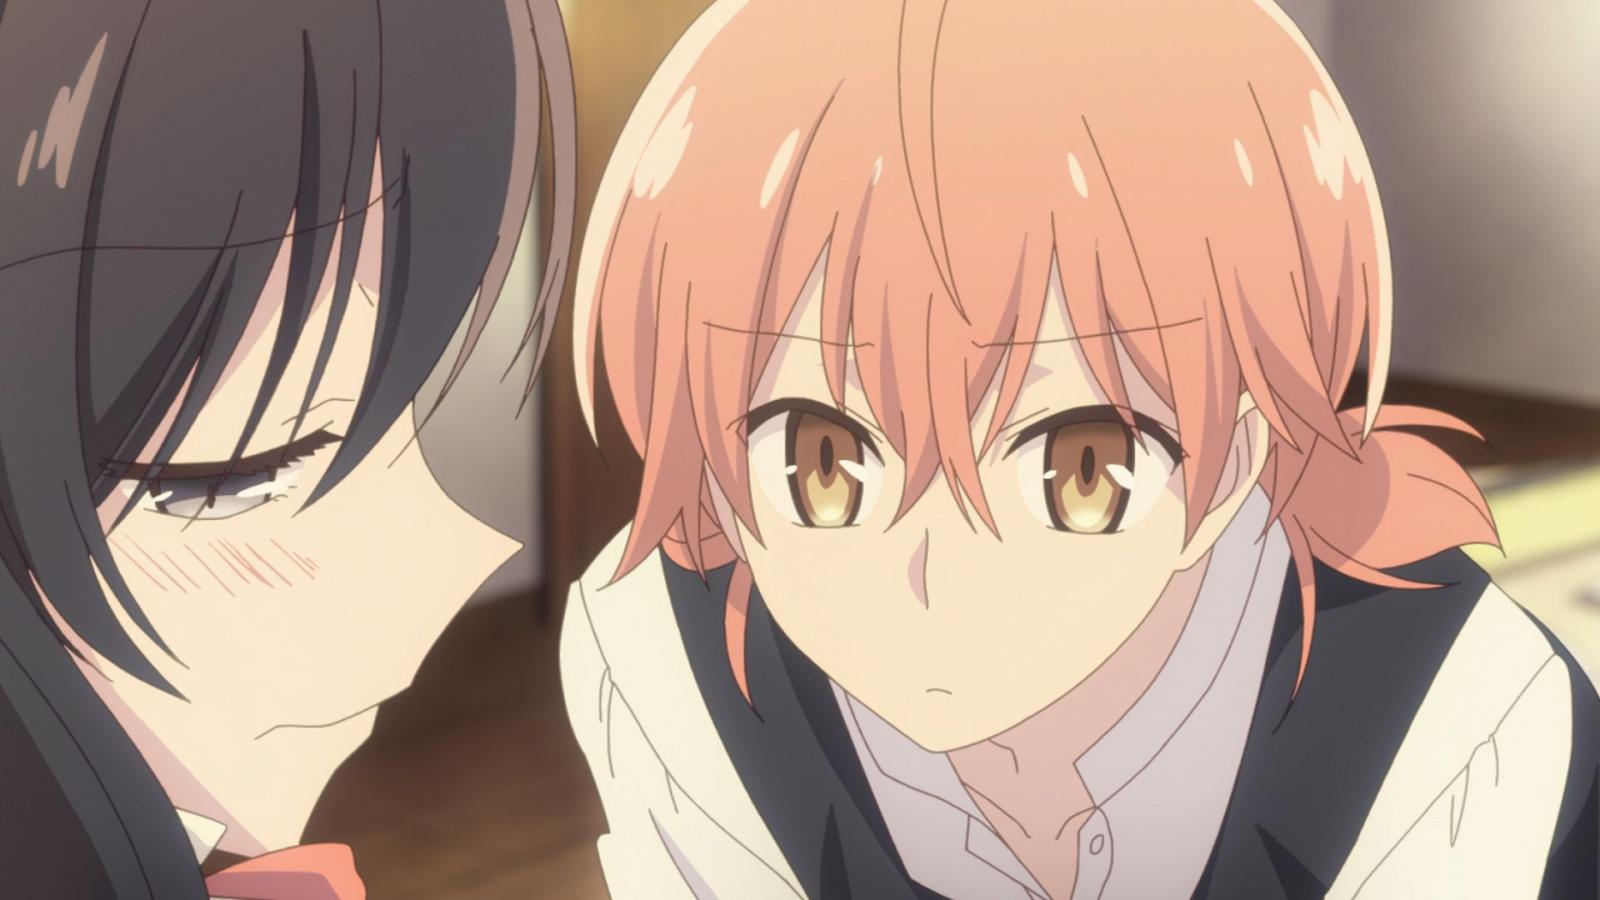 Bloom Into You - Gesamtedition - Volume 1-3: Episode 01-13 [Blu-ray] Image 6